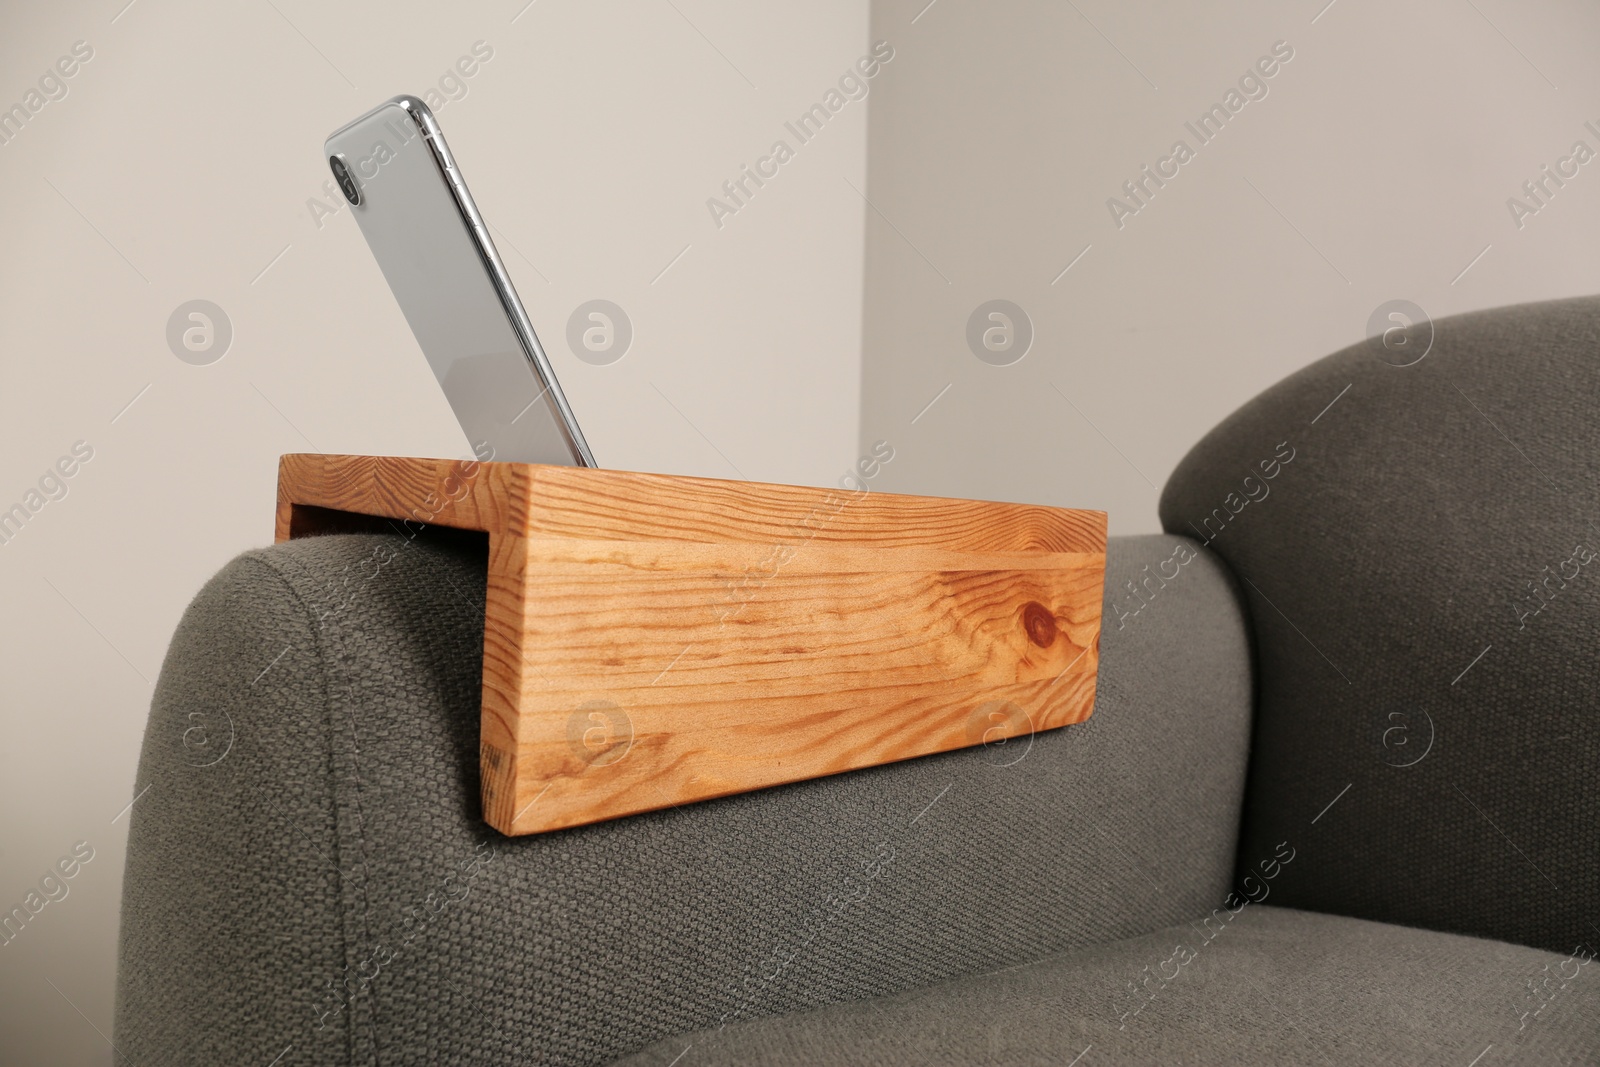 Photo of Smartphone on sofa with wooden armrest table in room. Interior element